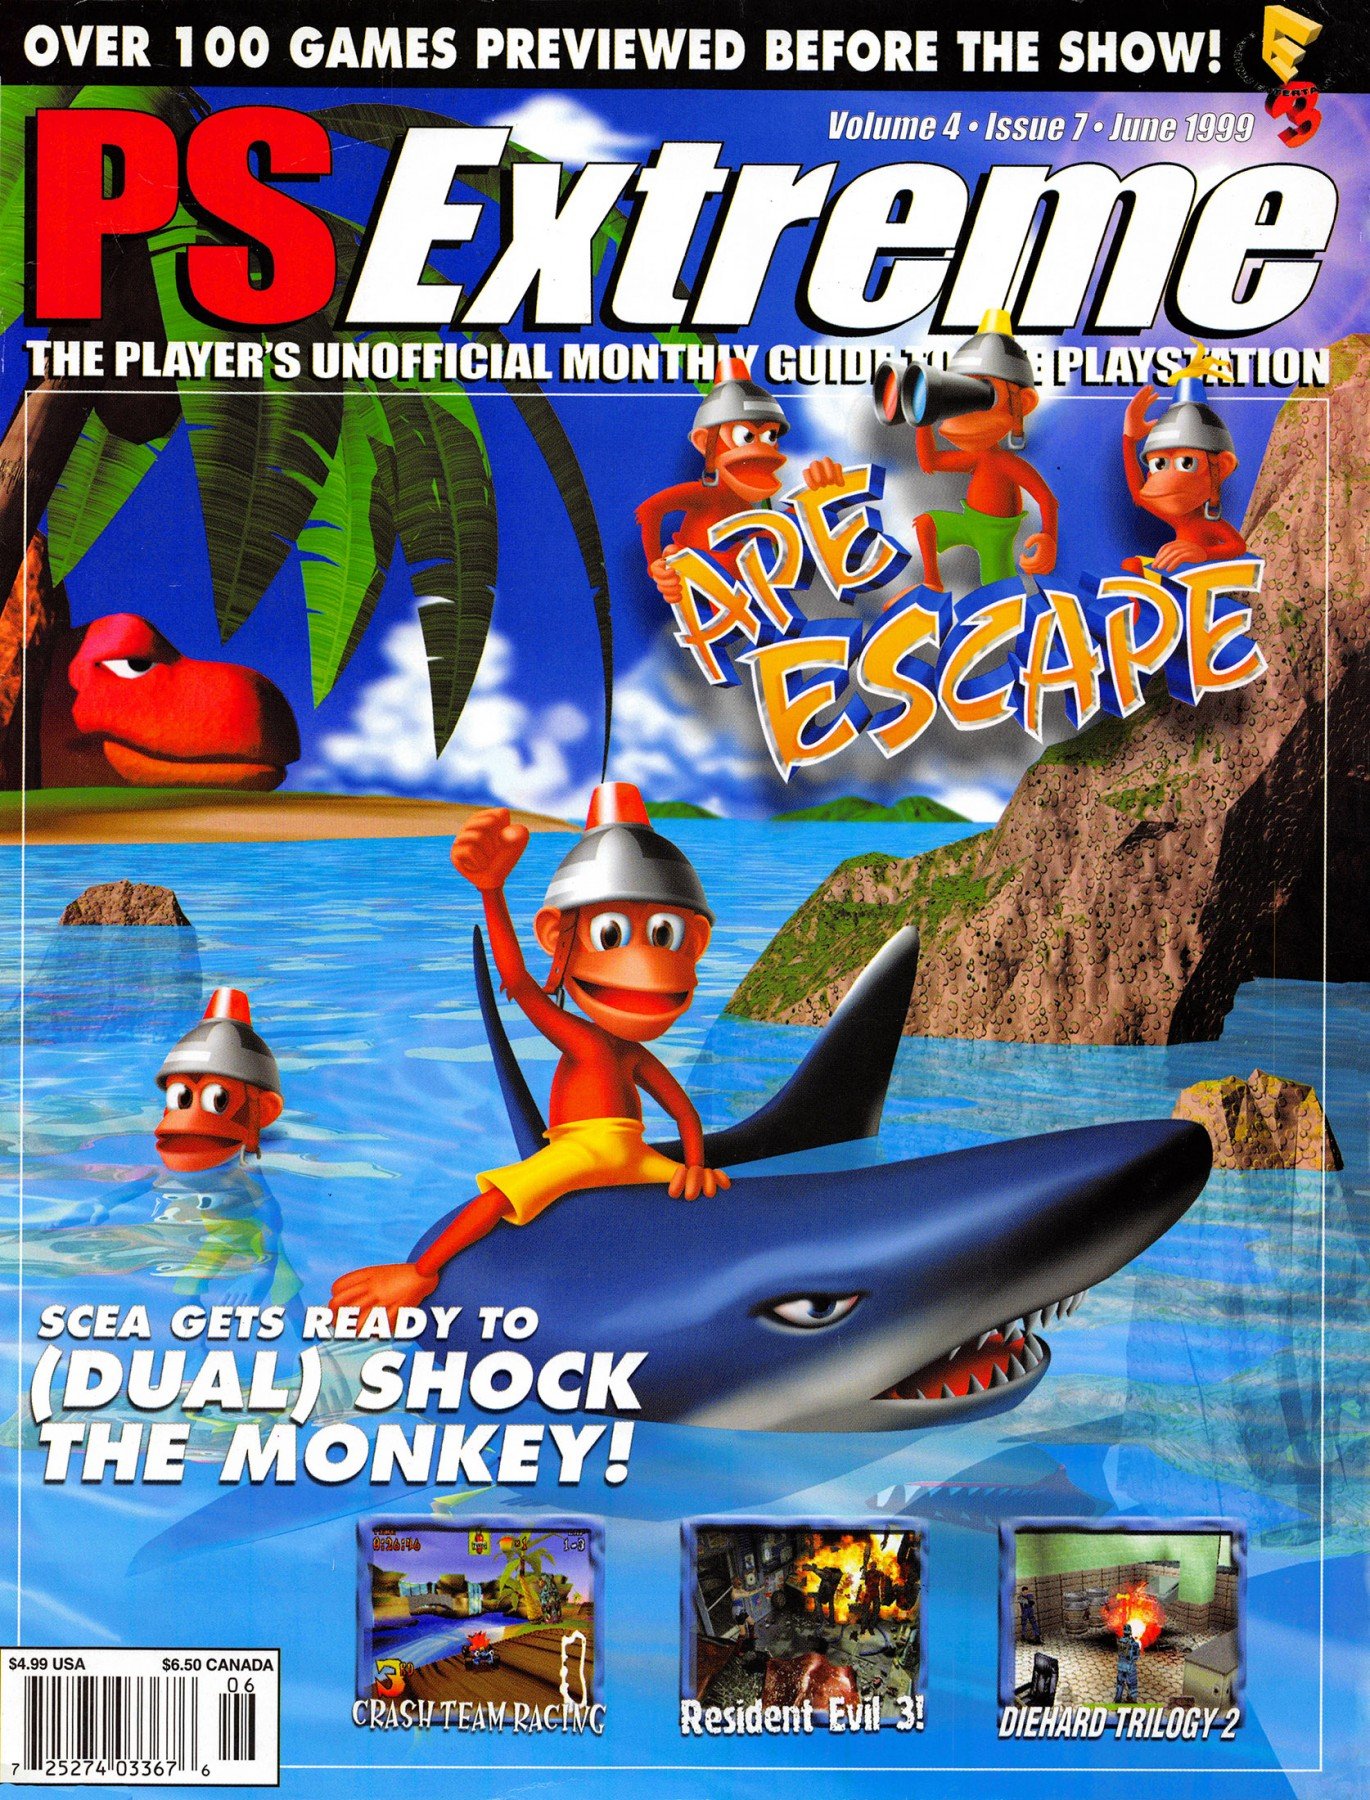 PSExtreme Issue 43 June 1999